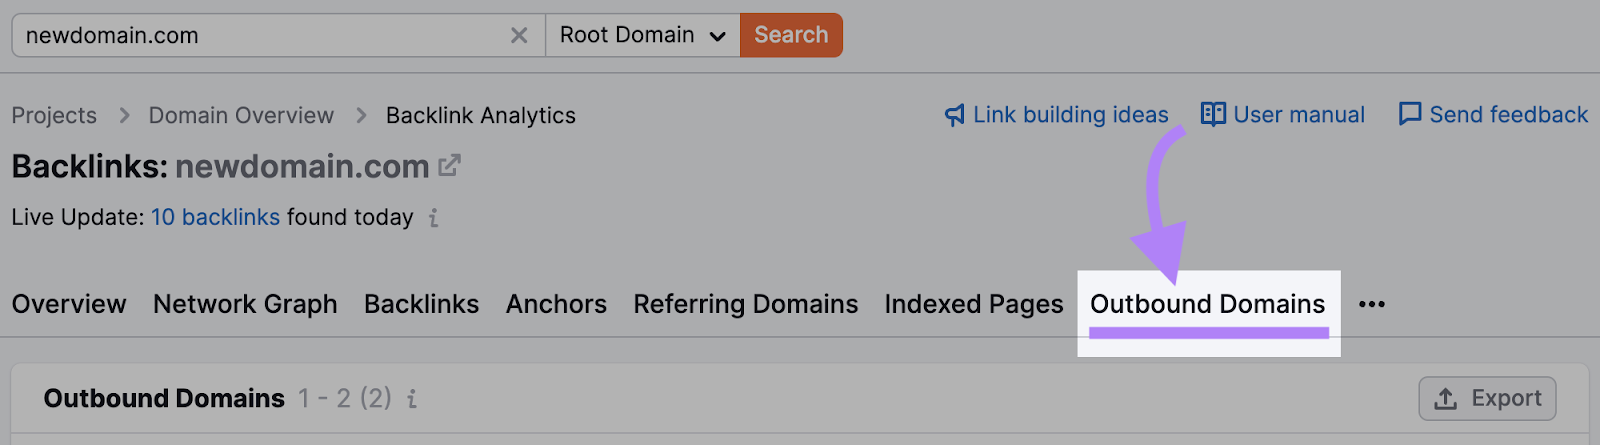 "Outbound Domains" selected from the Backlink Analytics tool upper menu